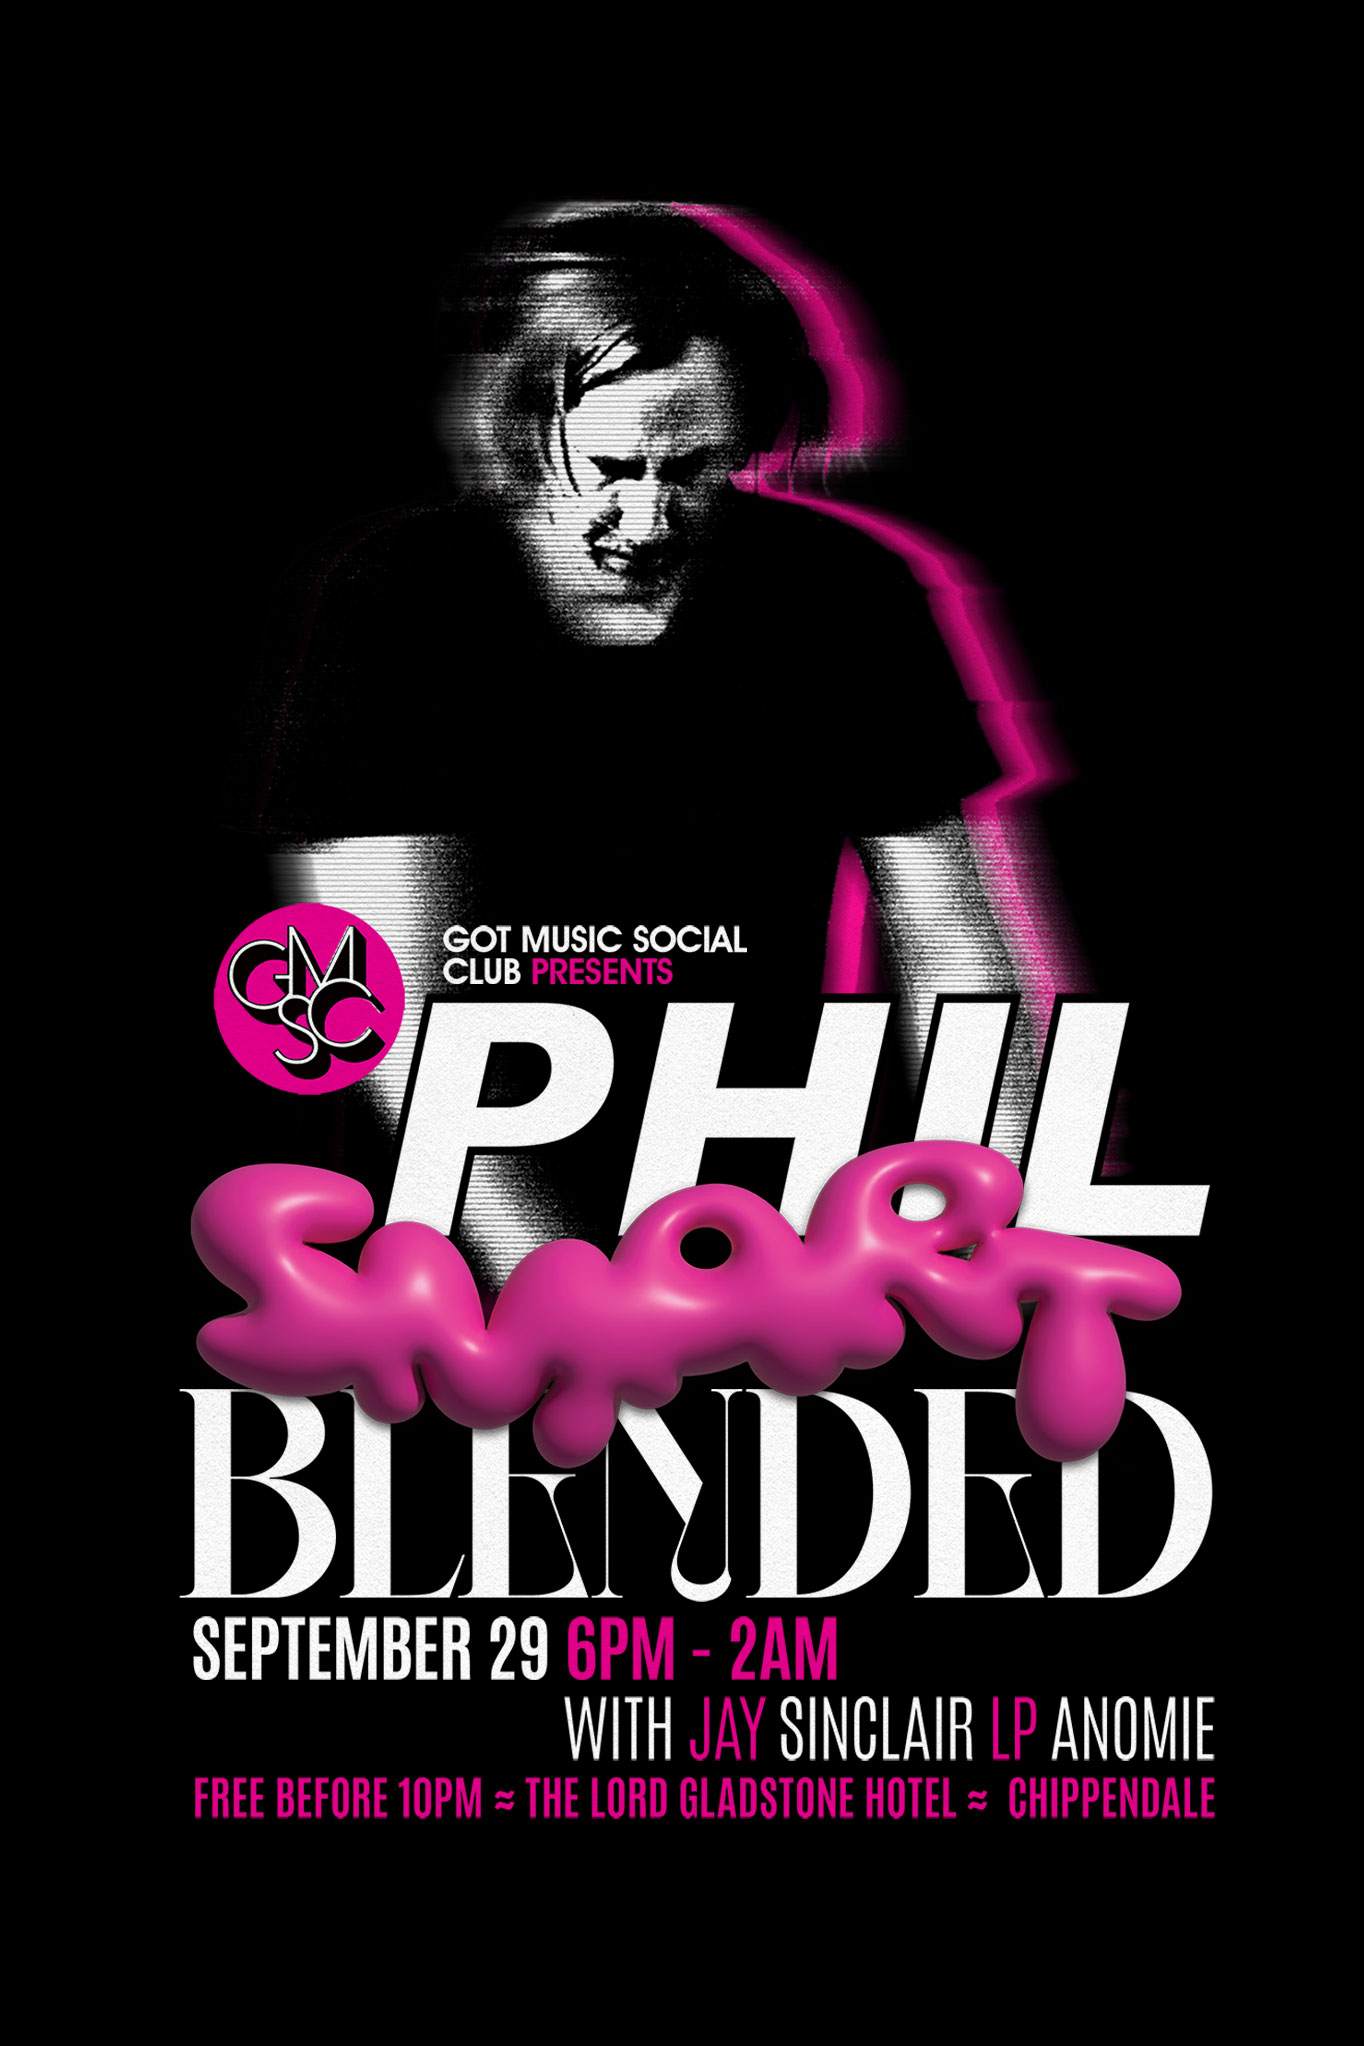 Got Music Social Club - Blended w Phil Smart - フライヤー表